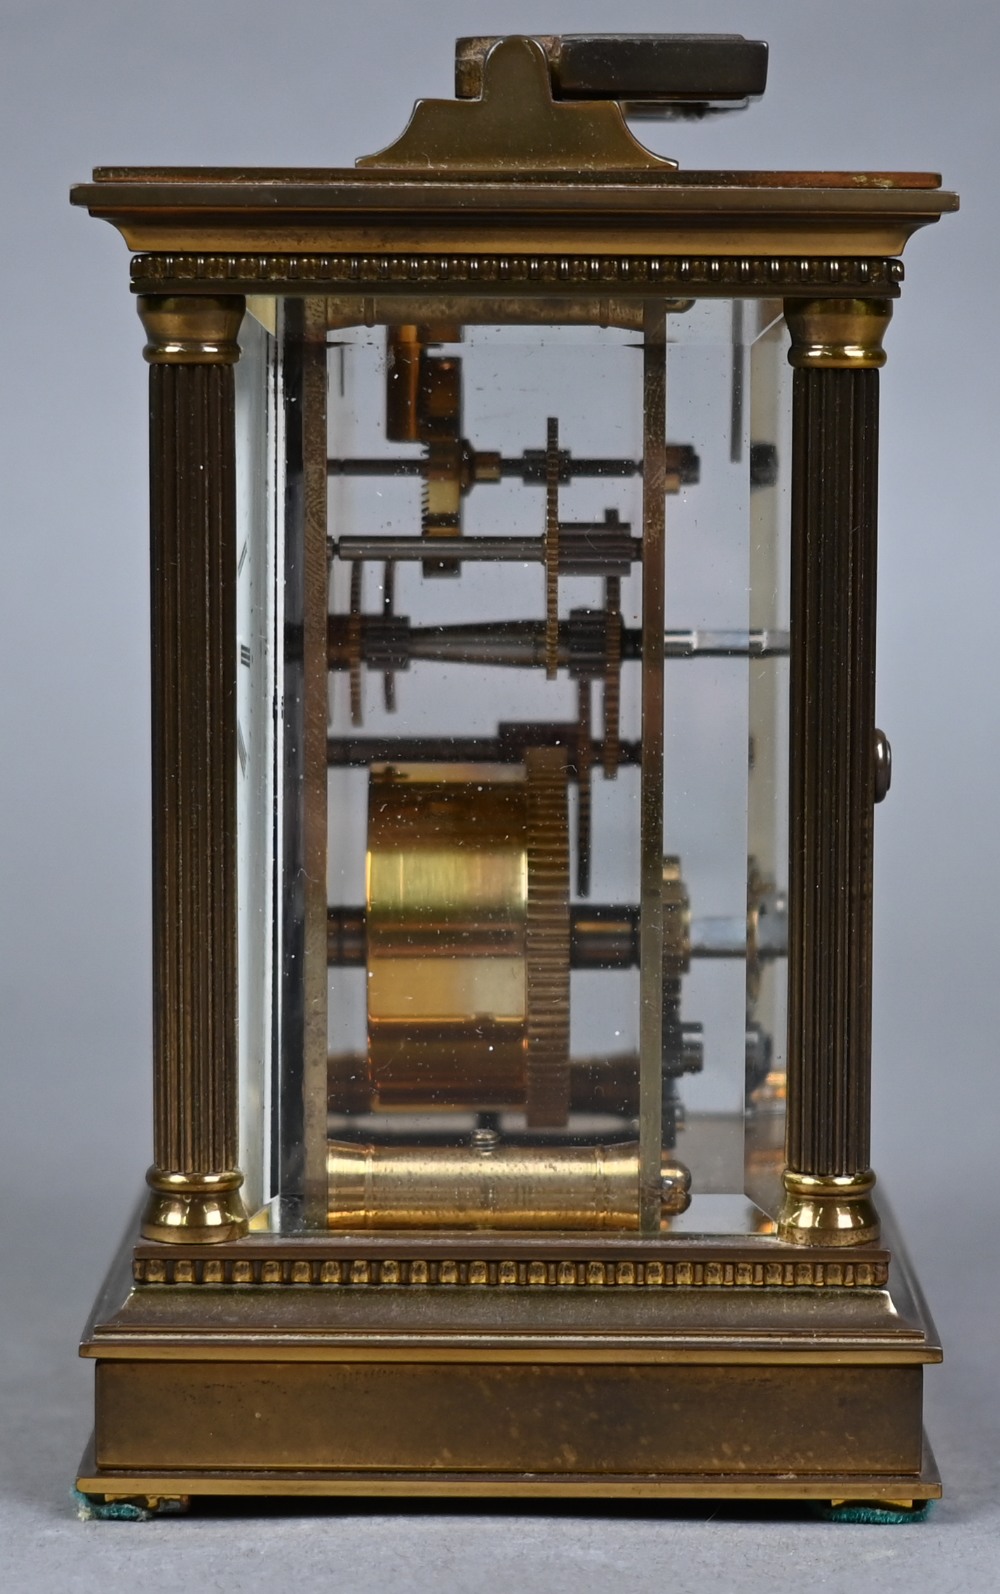 Matthew Norman, London, a Swiss made lacquered brass carriage clock, the single drum movement with - Image 6 of 6